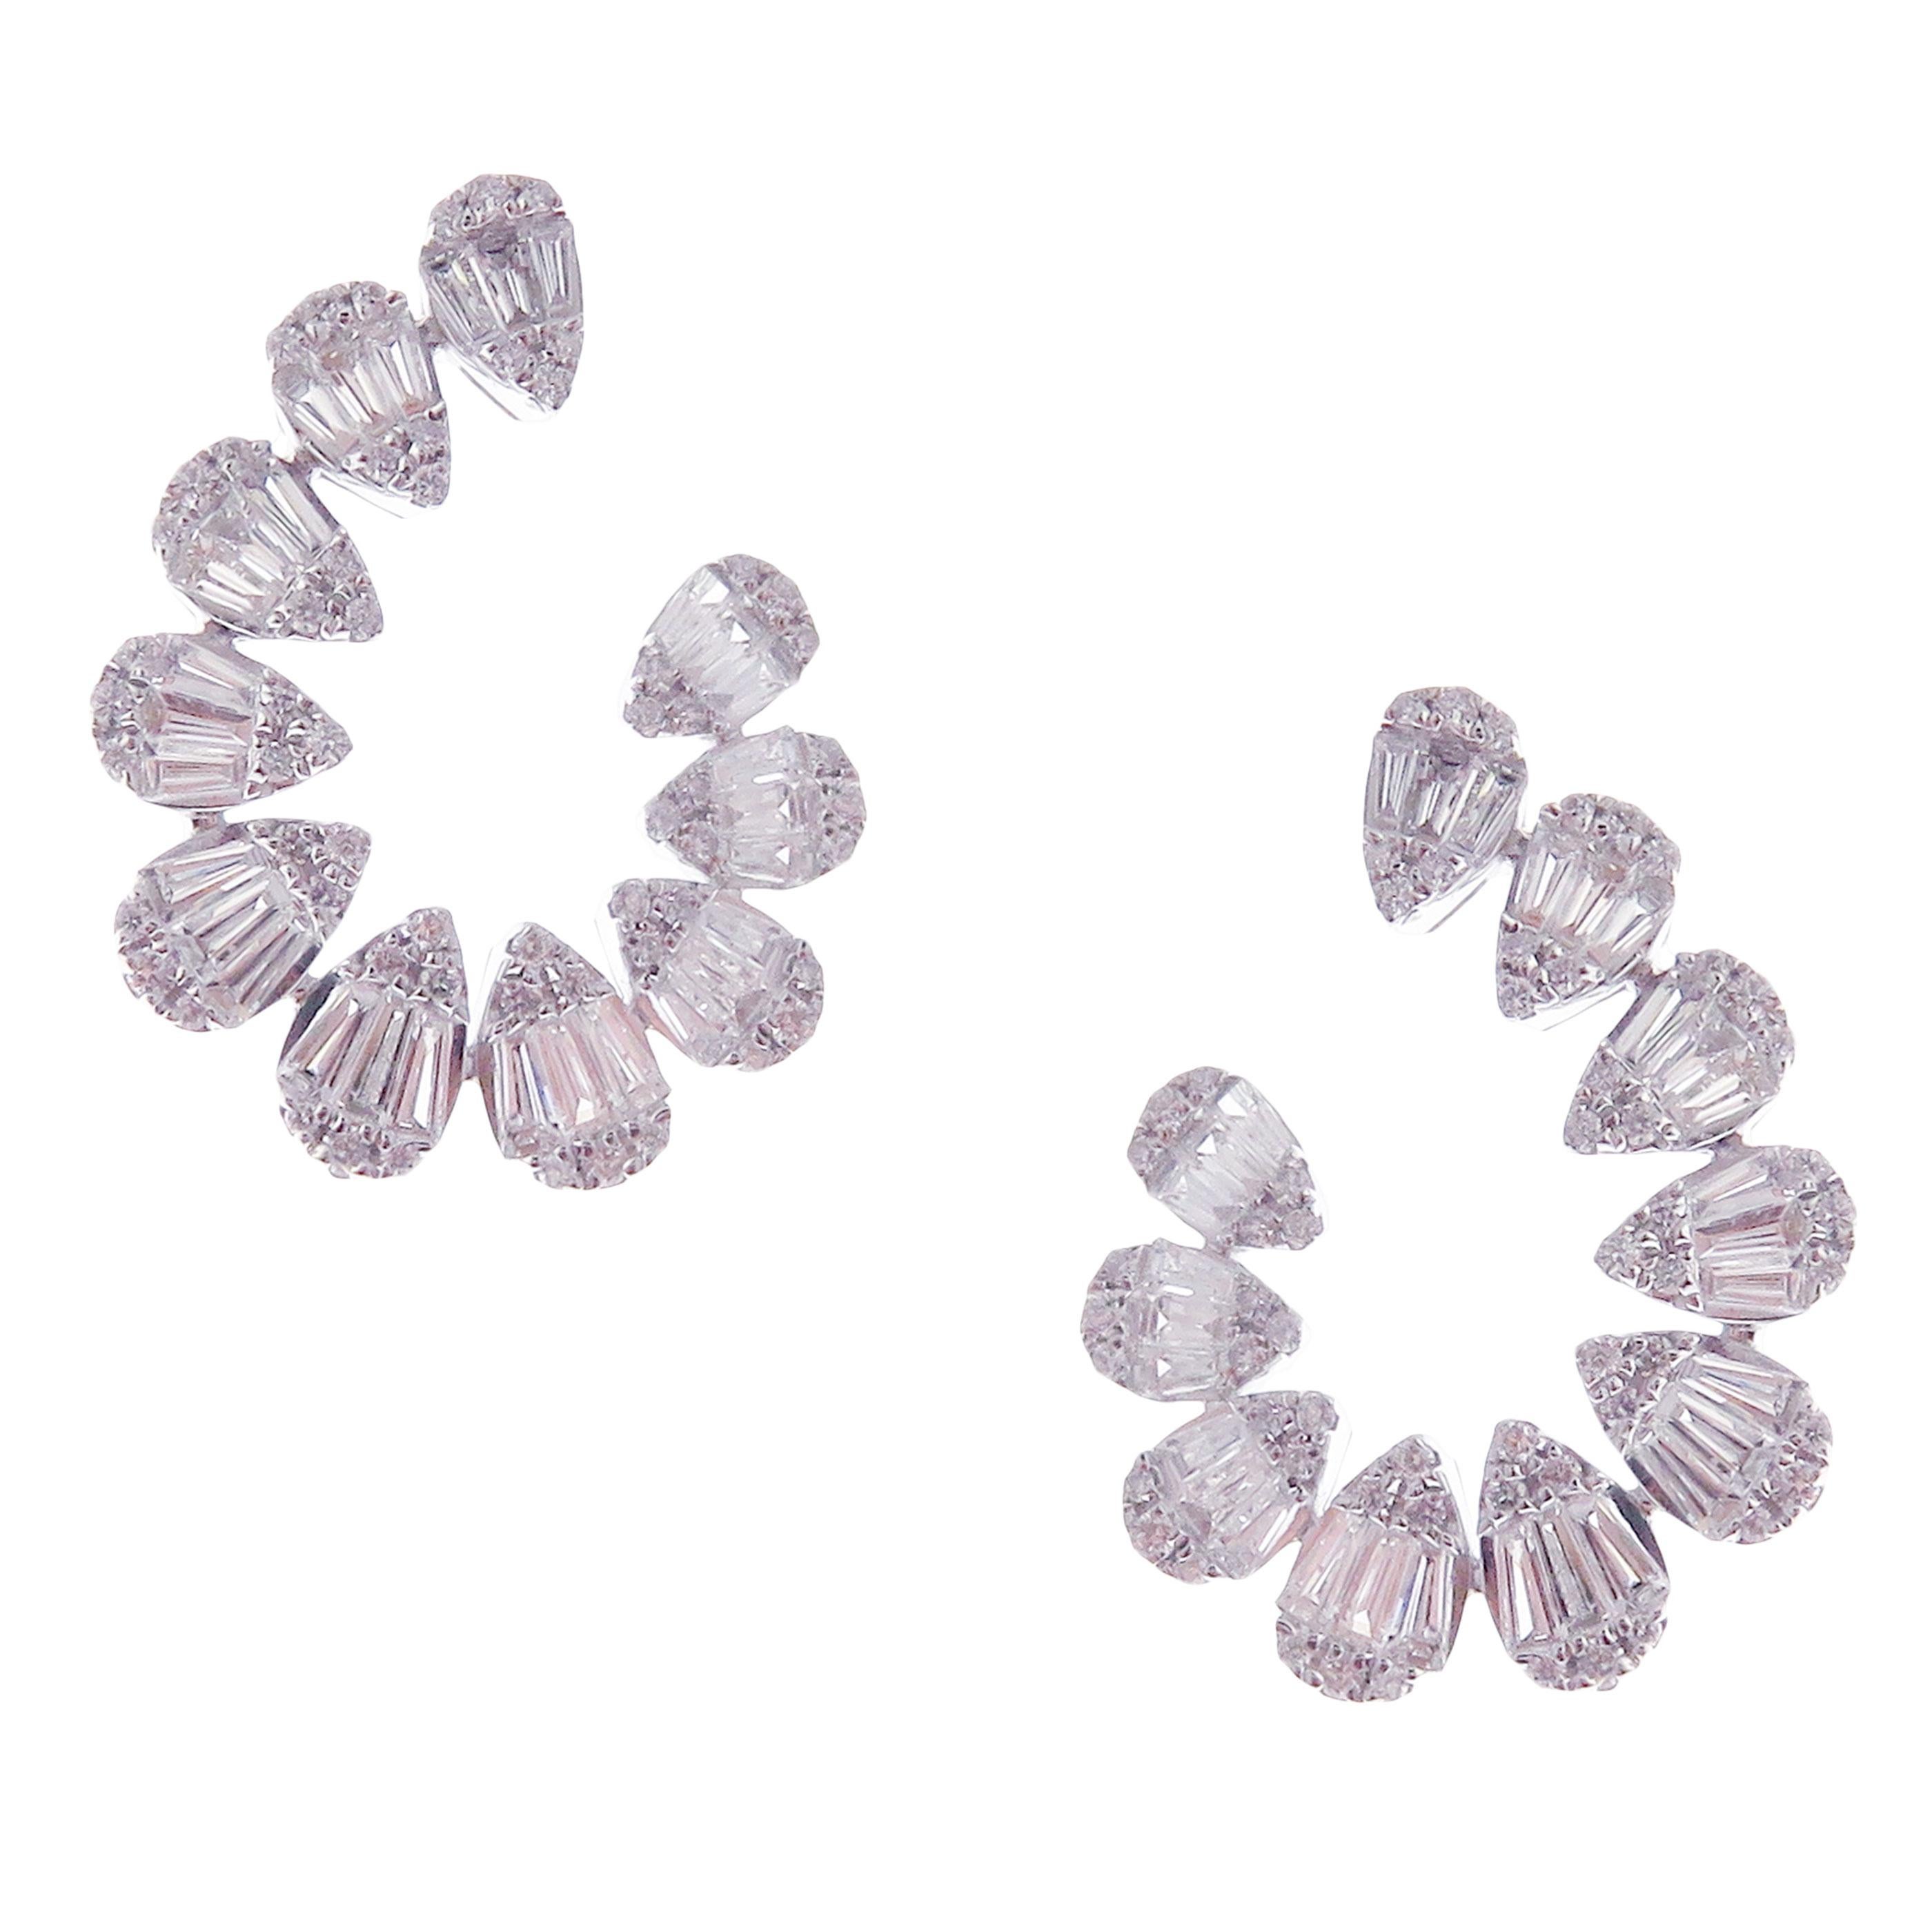 These trendy teardrop-shaped twisty earrings with round and baguette white diamonds are crafted in 18-karat white gold, featuring 120 round white diamonds totaling of 0.45 carats and 60 baguette white diamonds totaling of 1.17 carats.
These earrings